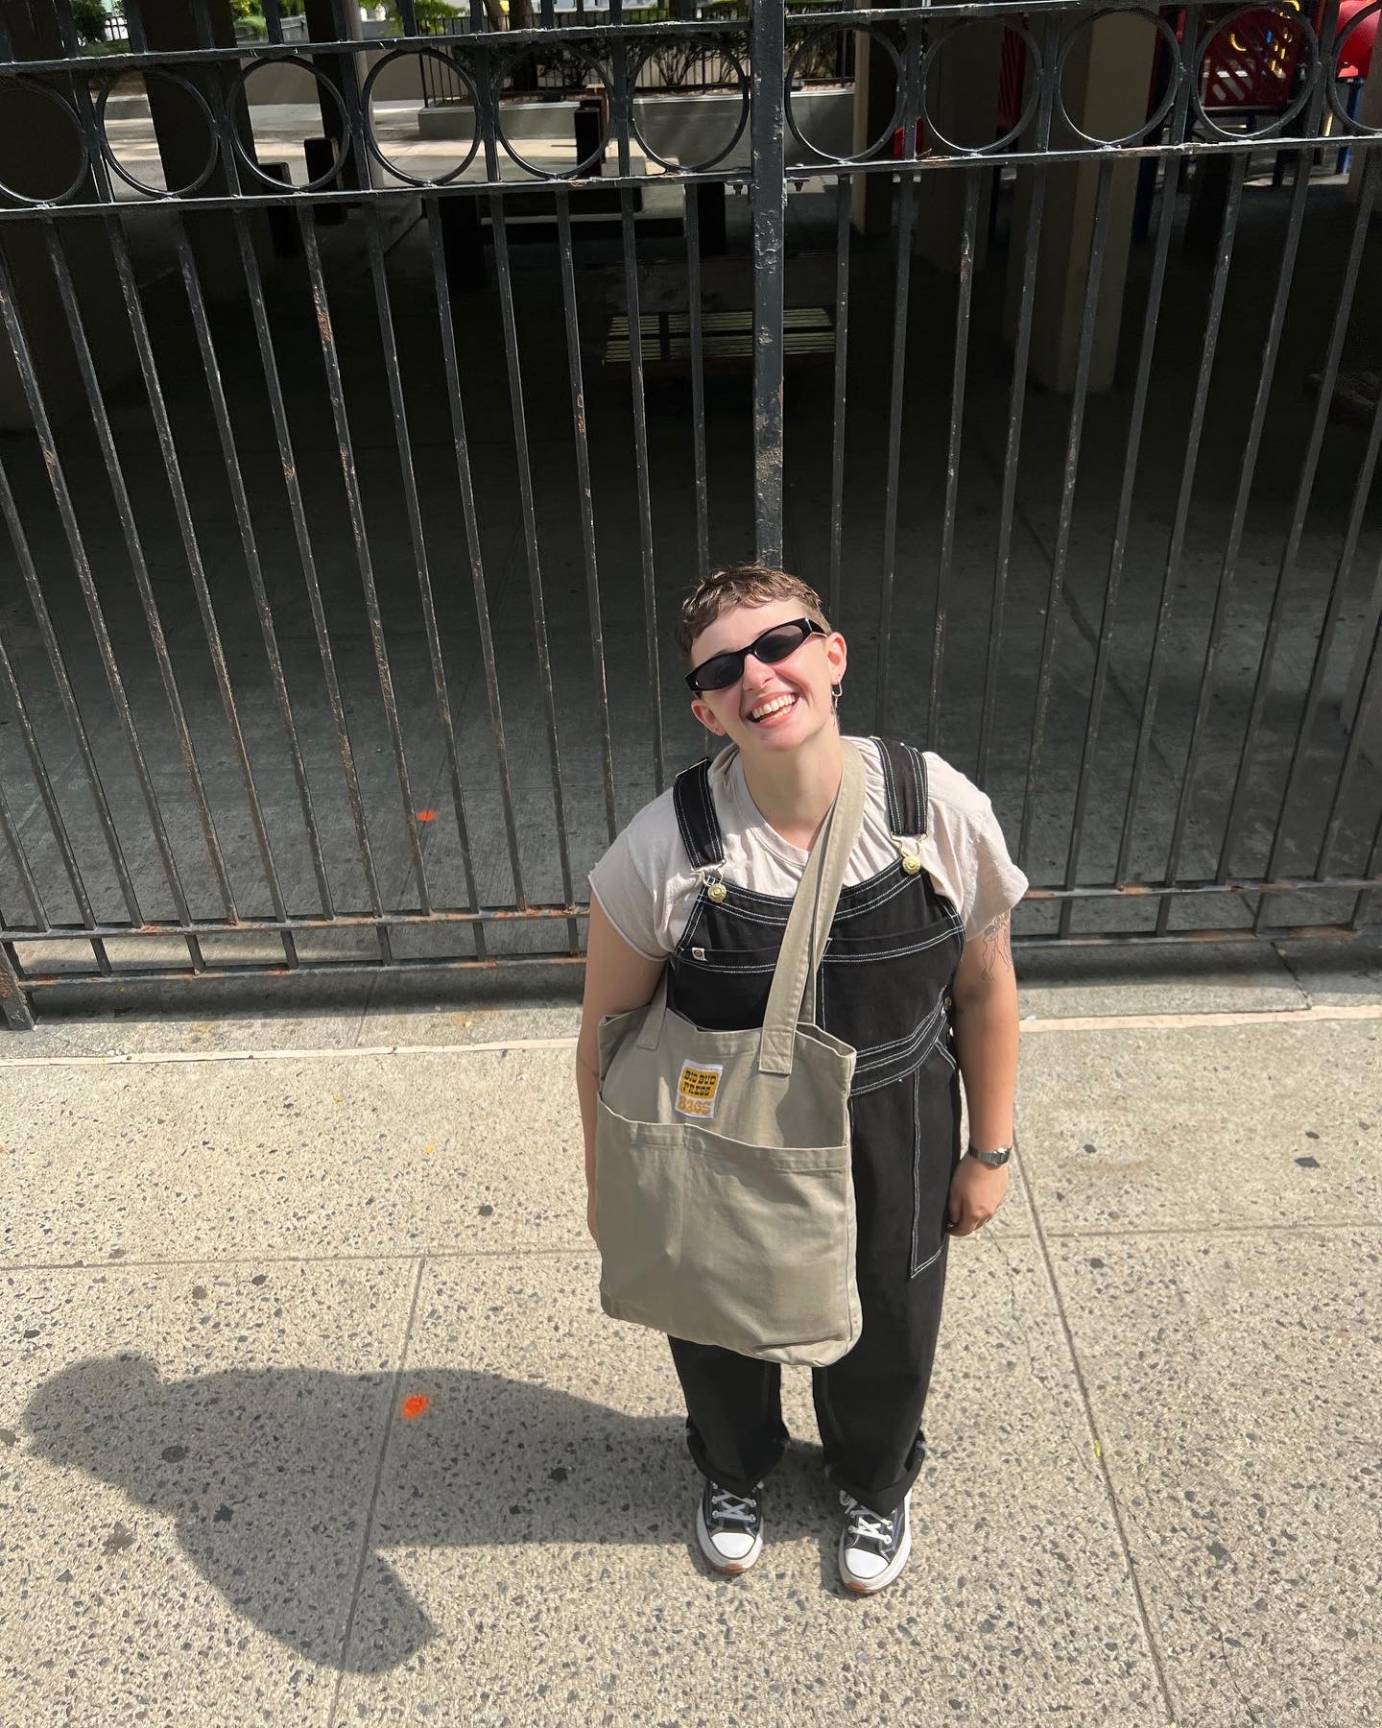 A trans woman looks up to the camera, wearing sun glasses, with a broad smile on her face. She is wearing bib overalls, a tan satchel over one shoulder and sneakers. The background is a wrought iron fence.